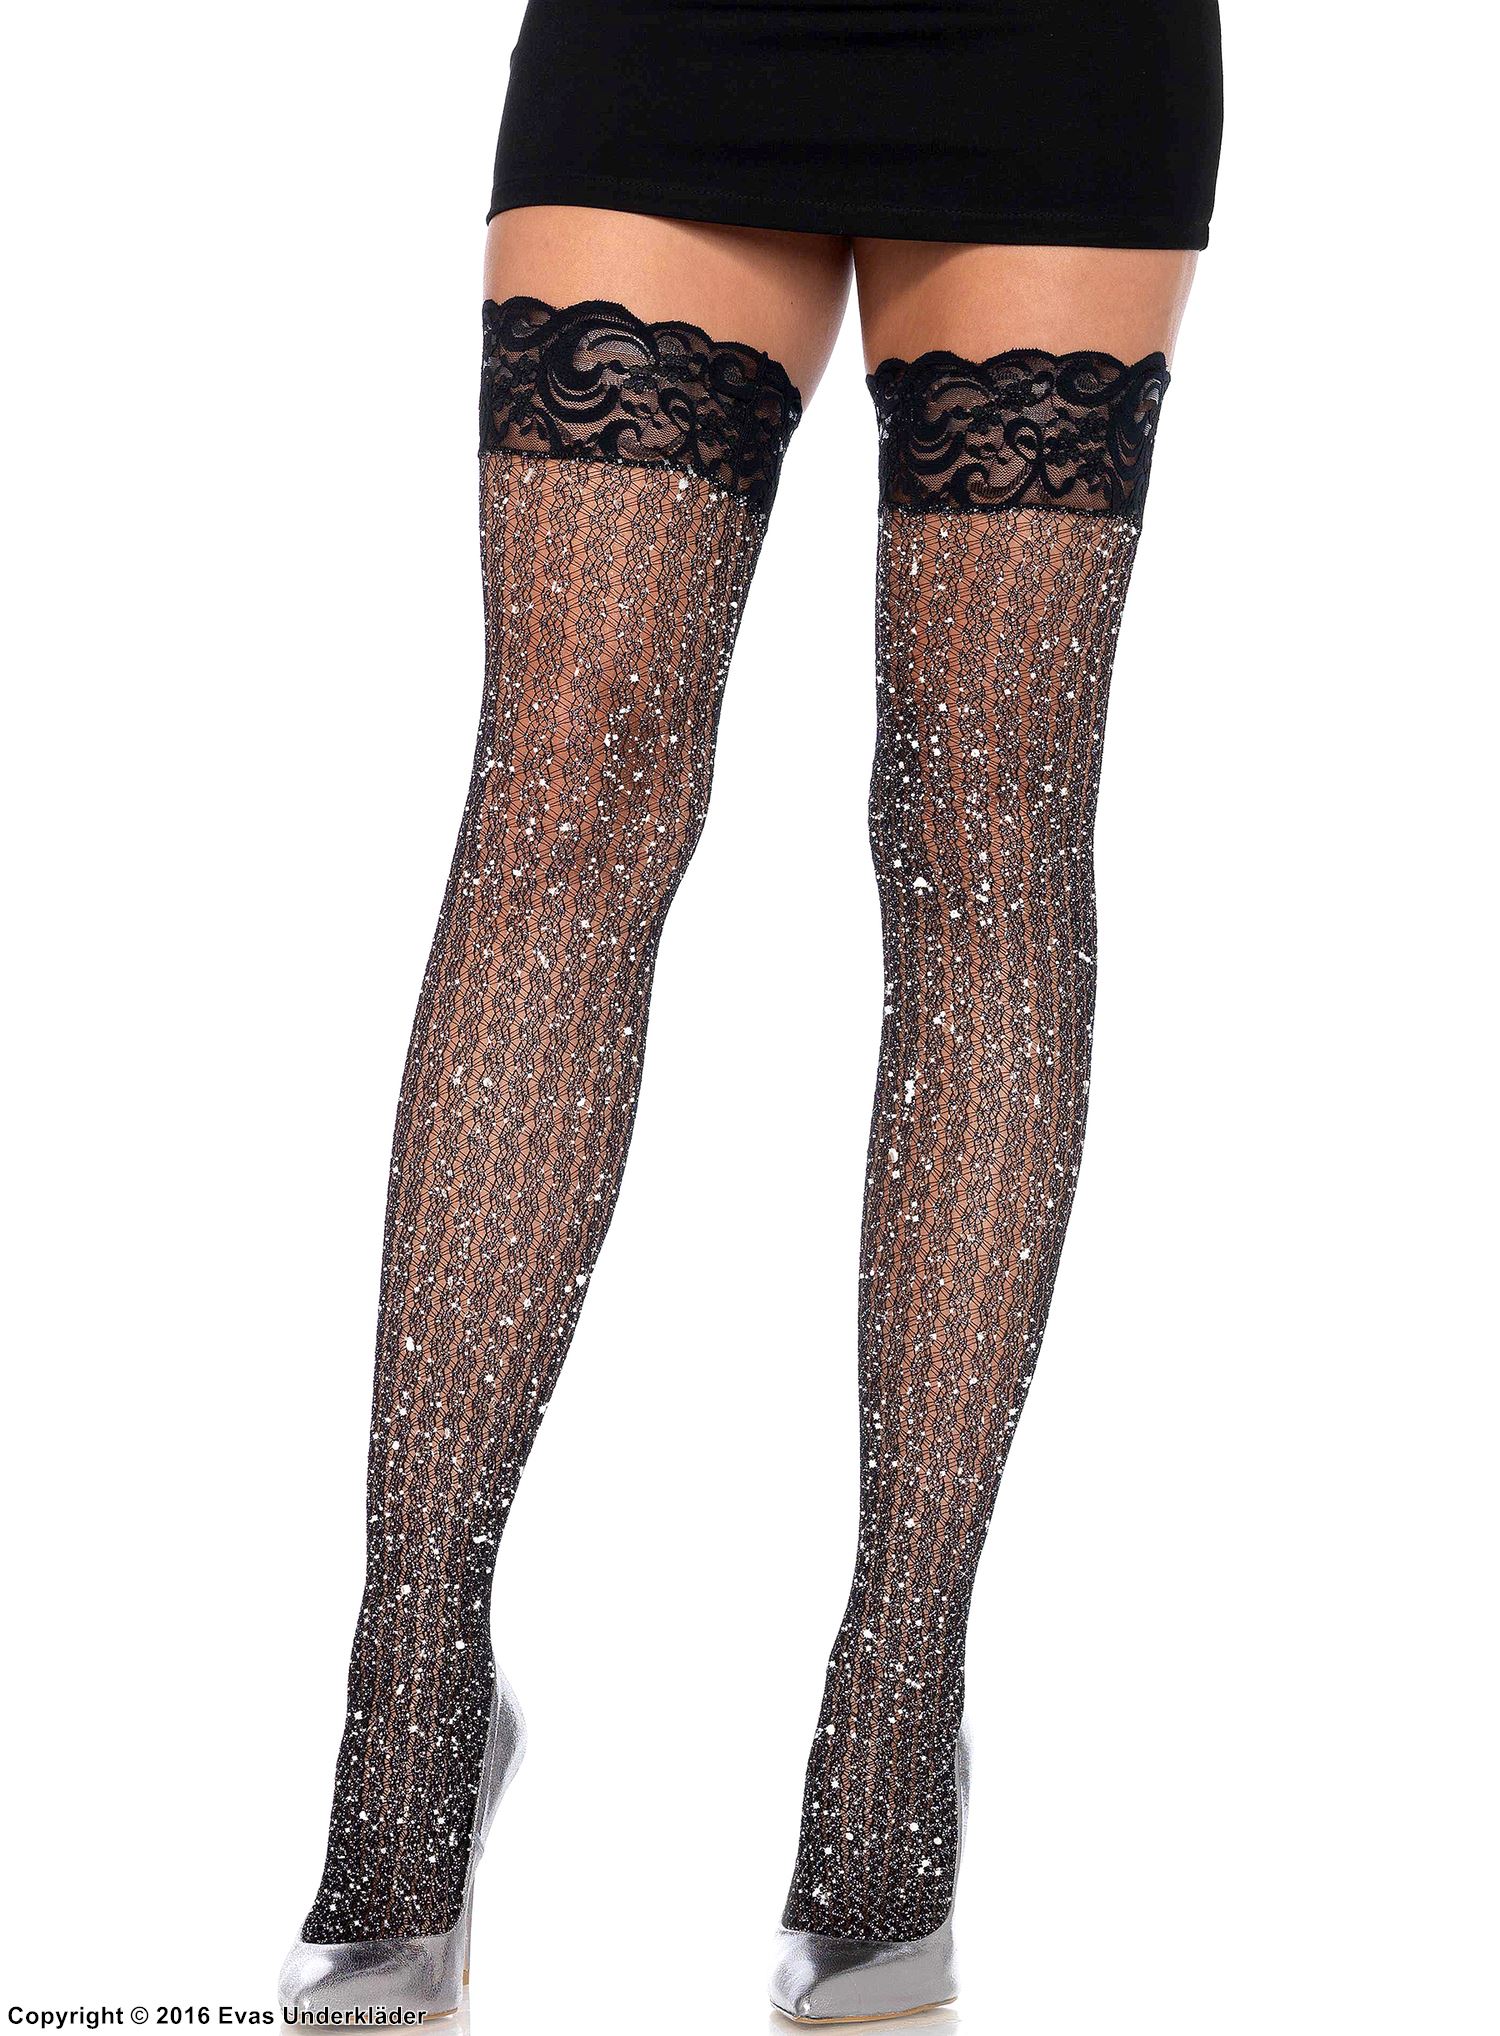 Thigh high stay-ups, small fishnet, lace edge, shimmering lurex